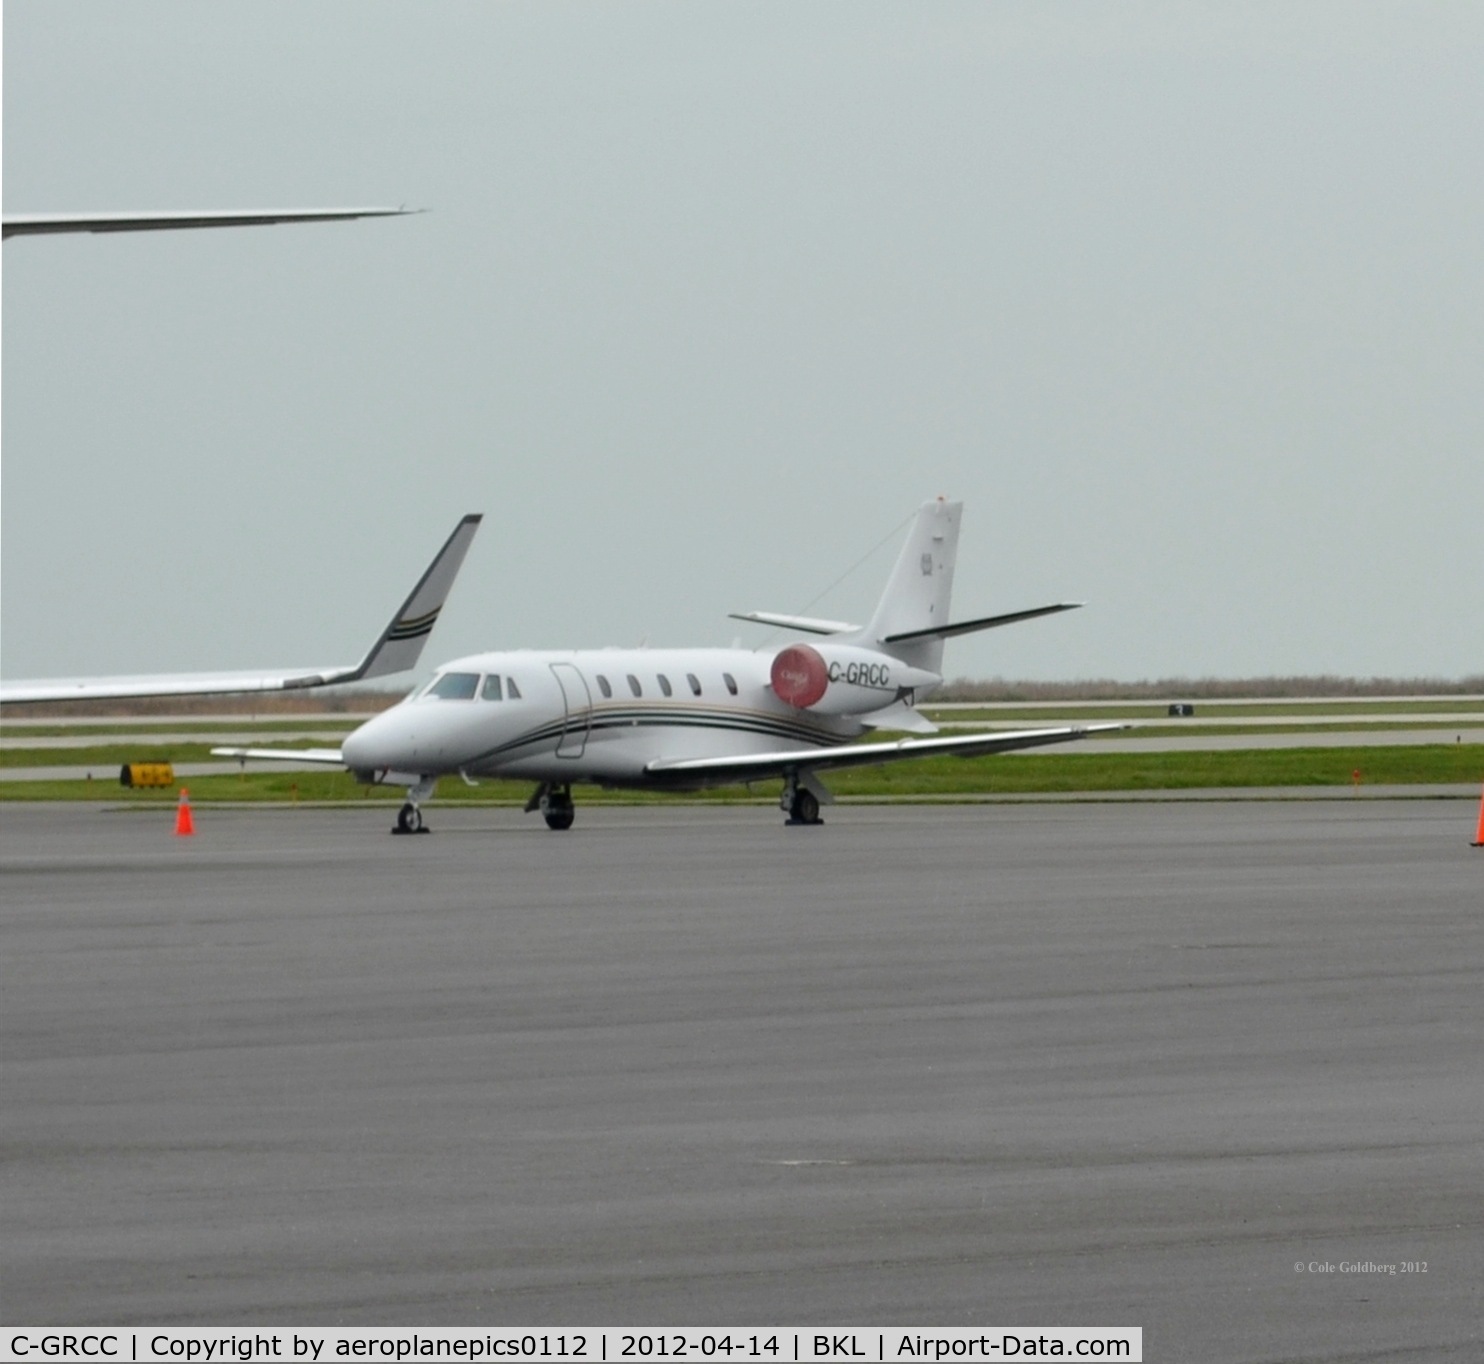 C-GRCC, 2002 Cessna 560XL Citation Excel C/N 560-5297, C-GRCC seen on a rainy day in Cleveland.